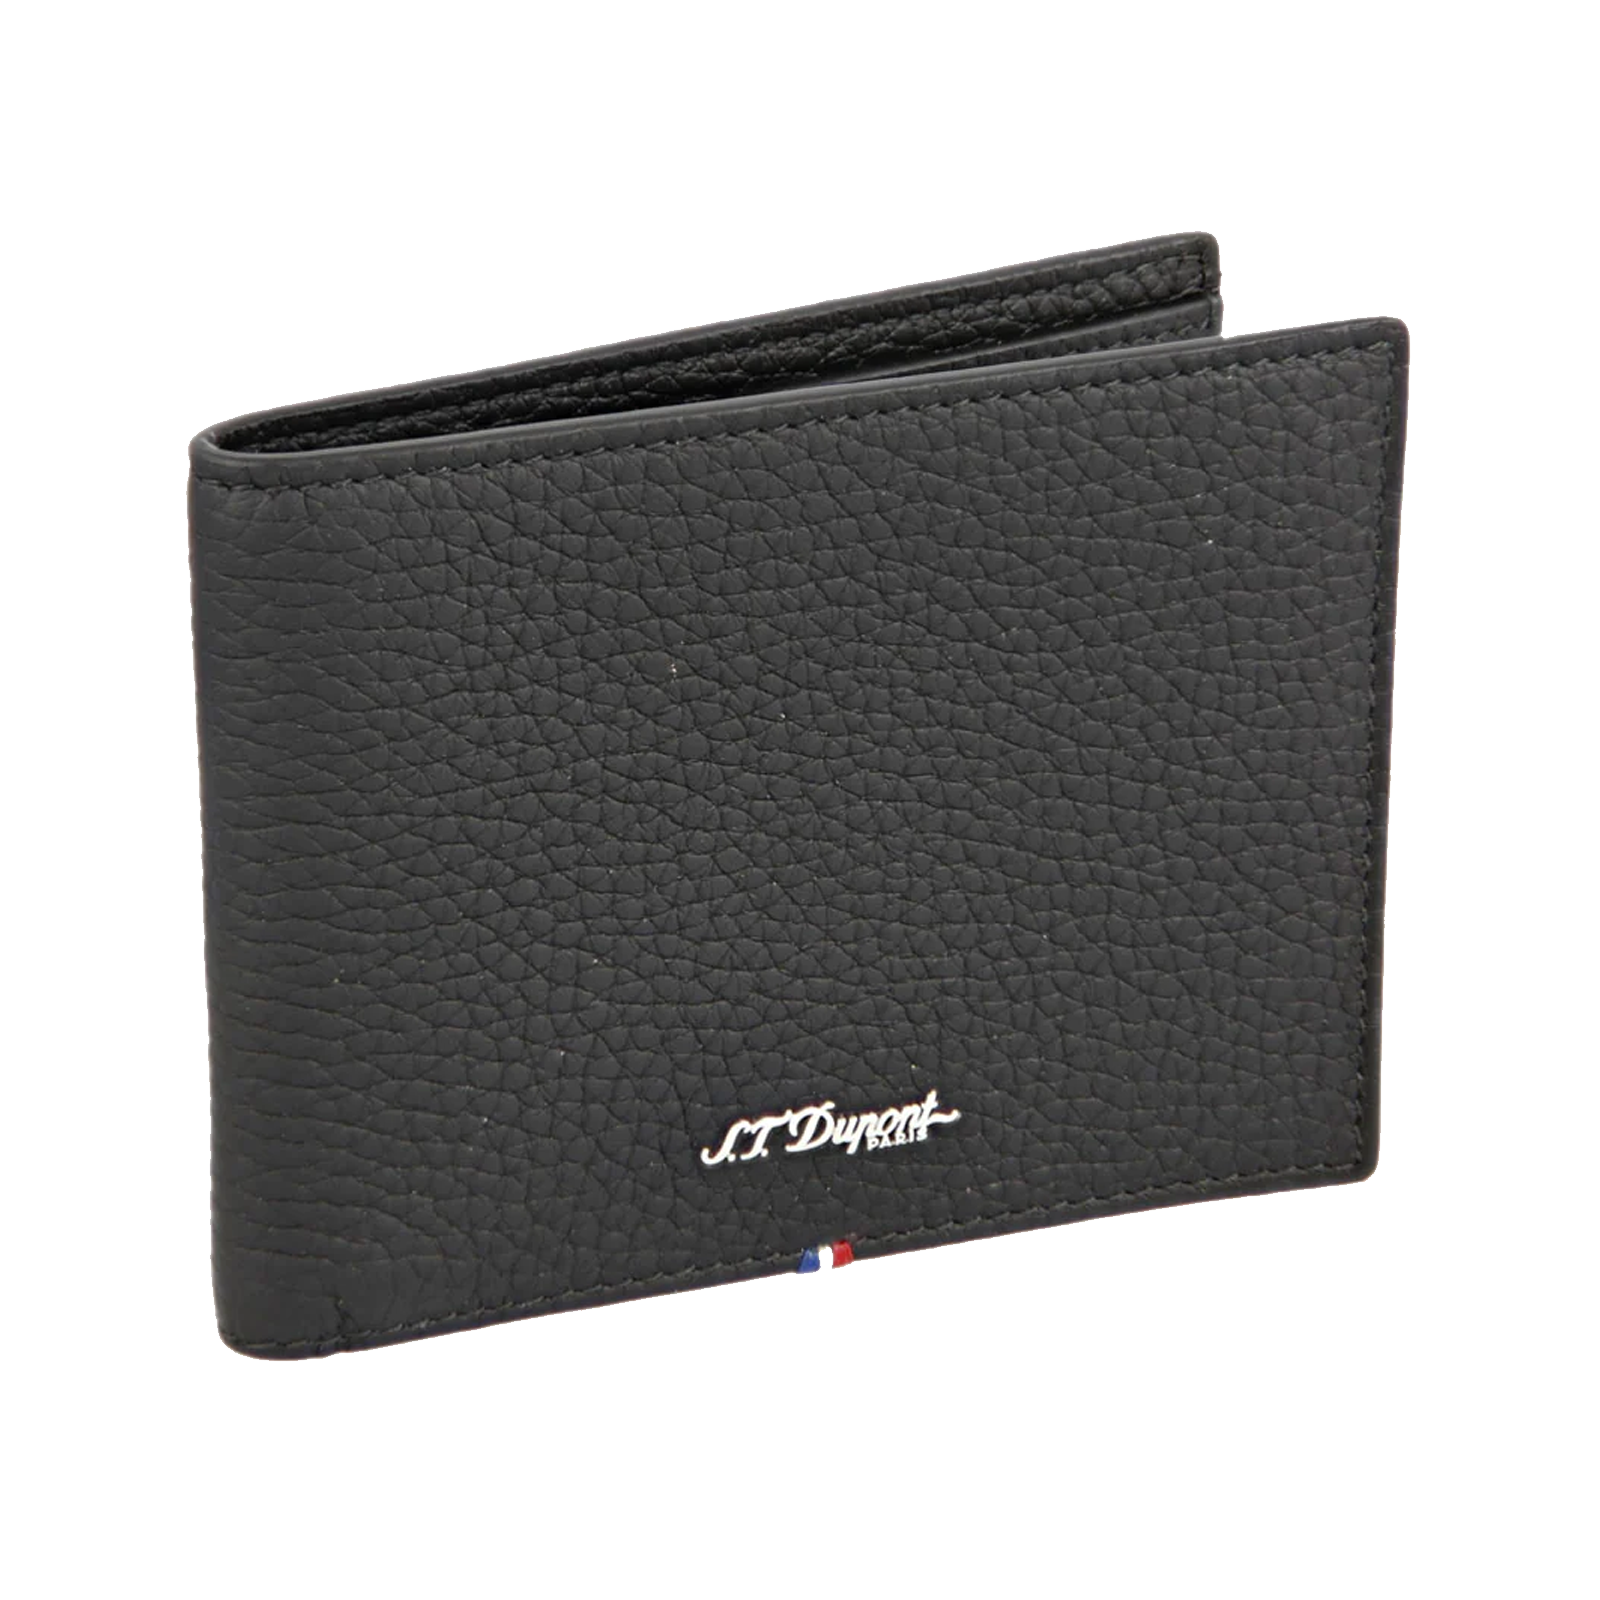 St Dupont Navy Blue/Black Grained Neo Capsule 6 Card Wallet, Wallet, Gifts & Accessories, Categories